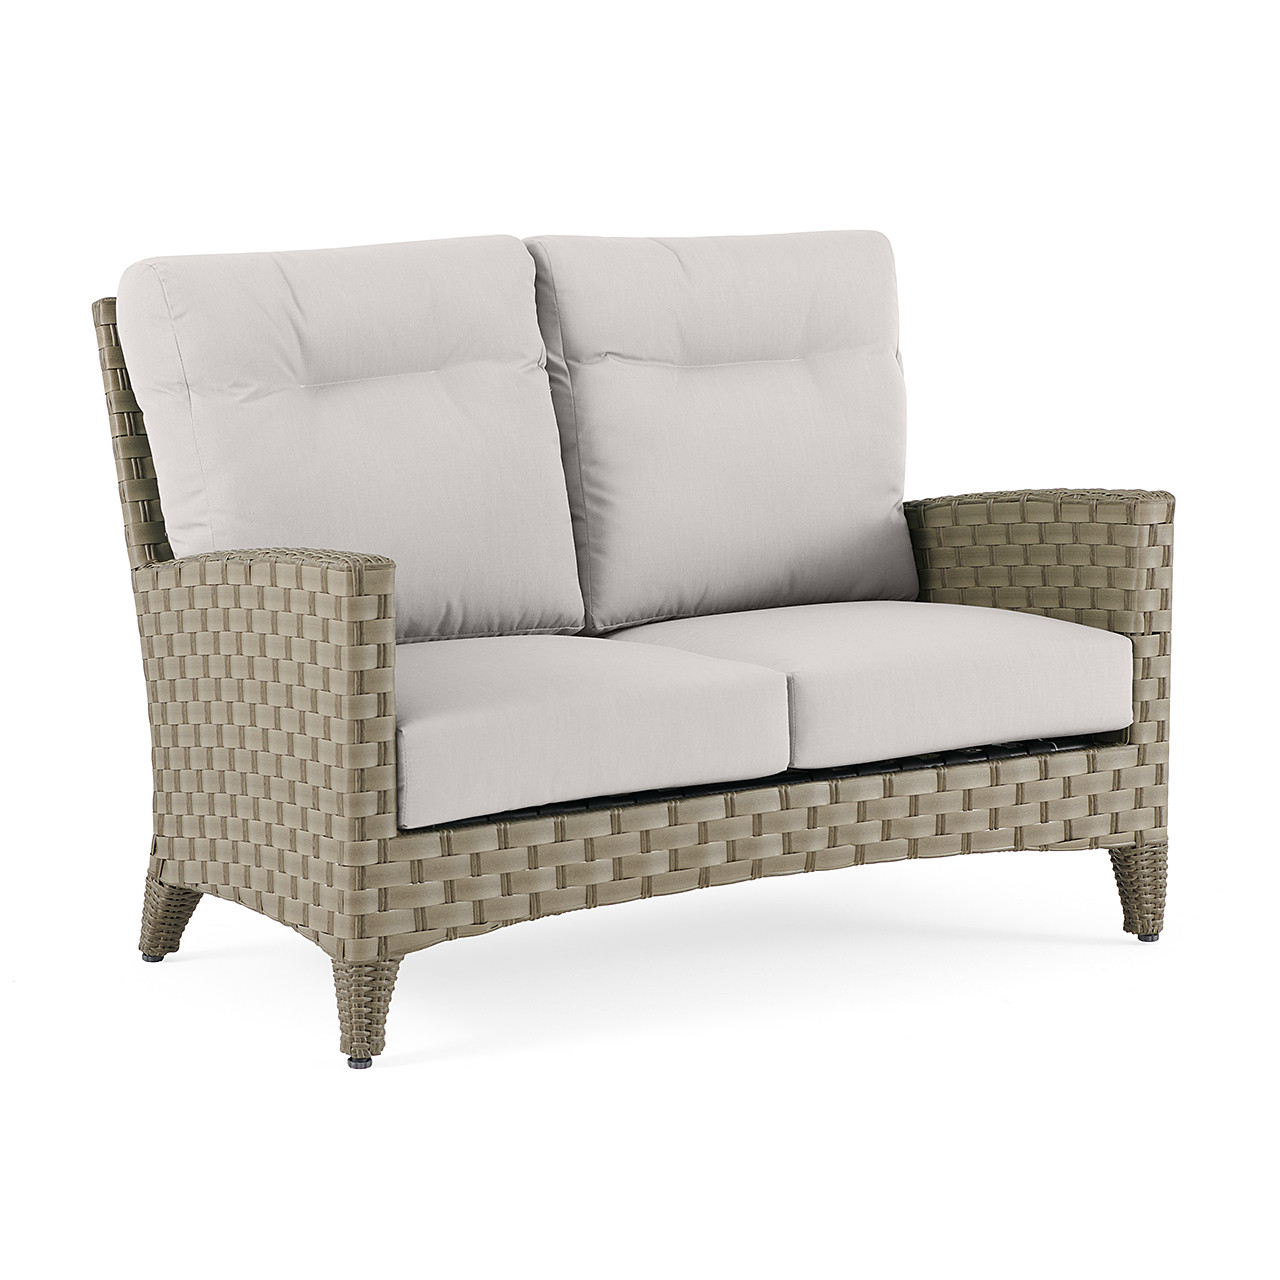 Gramercy Sea Grey Outdoor Wicker with Cushions Loveseat